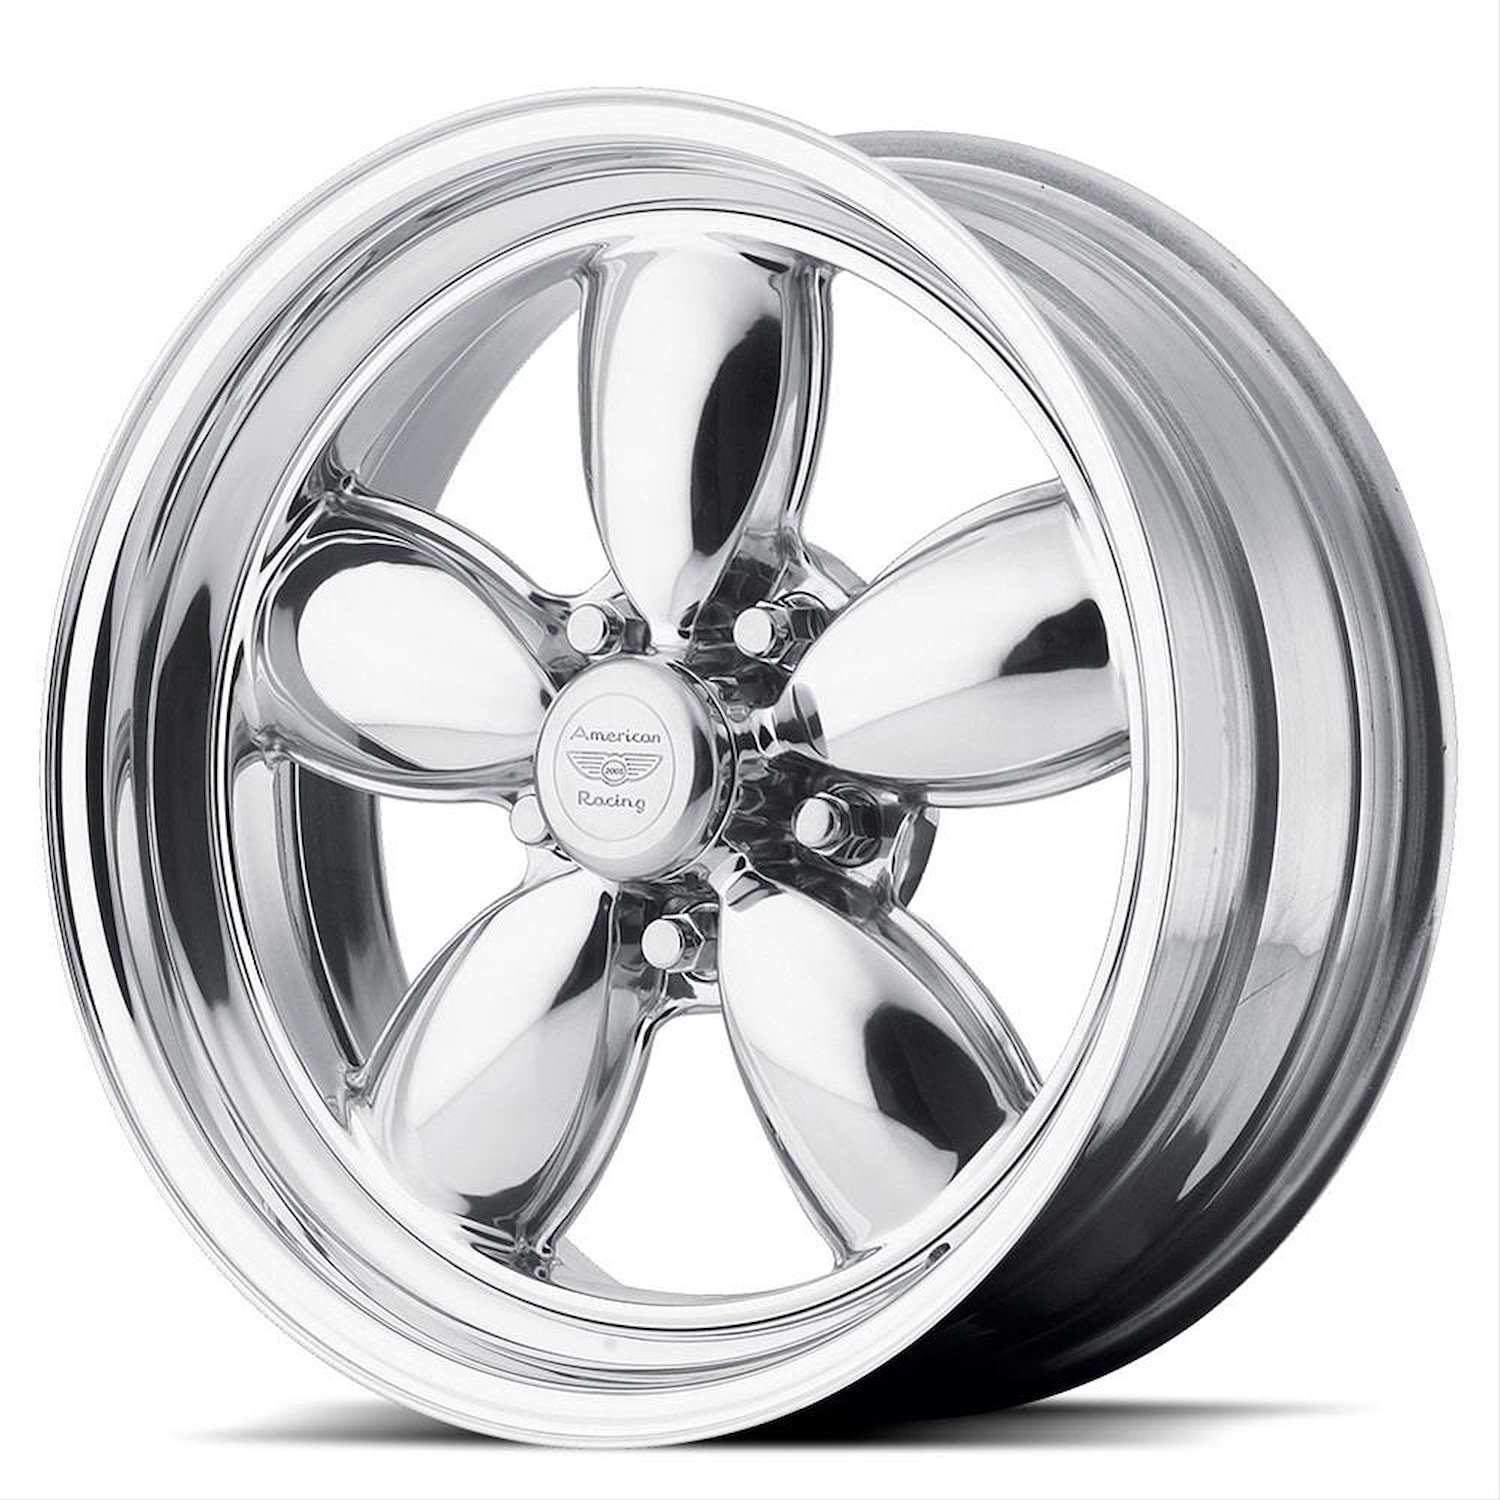 AMERICAN RACING CLASSIC 200S TWO-PIECE POLISHED 17 x 8 5x4.5 6 4.74